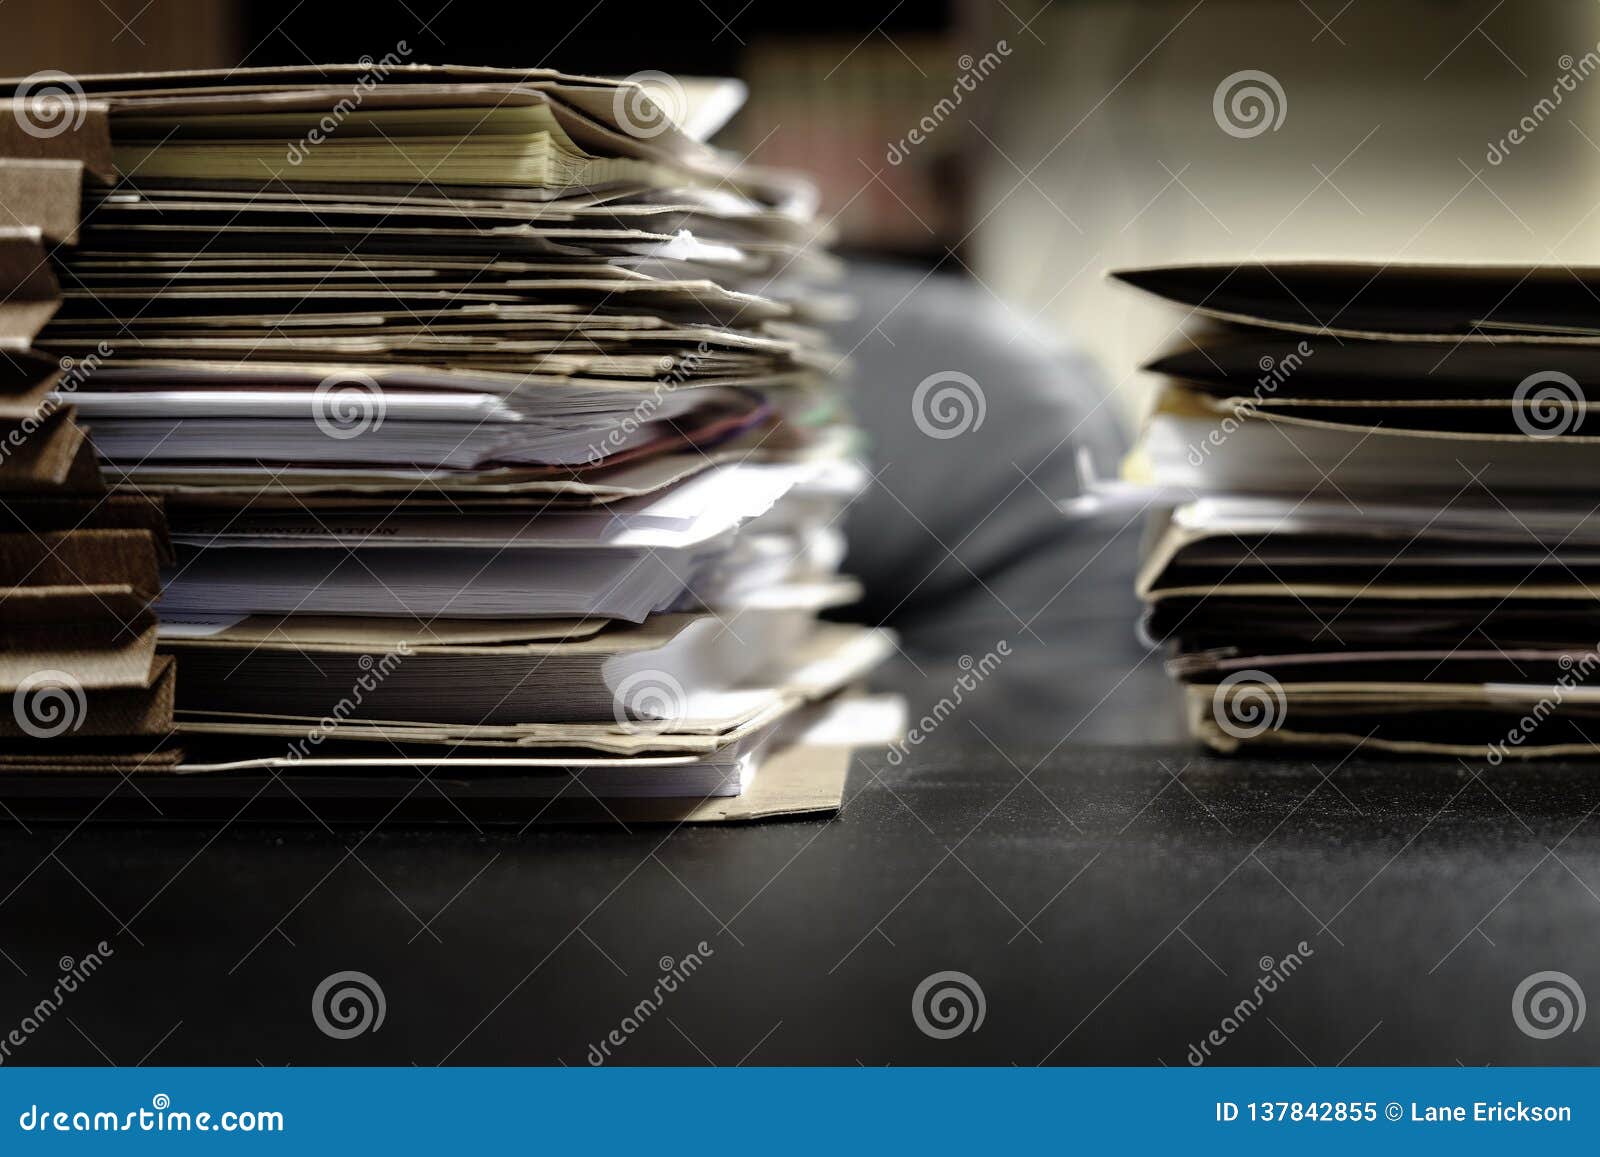 files on desk business work folders for organizing papers